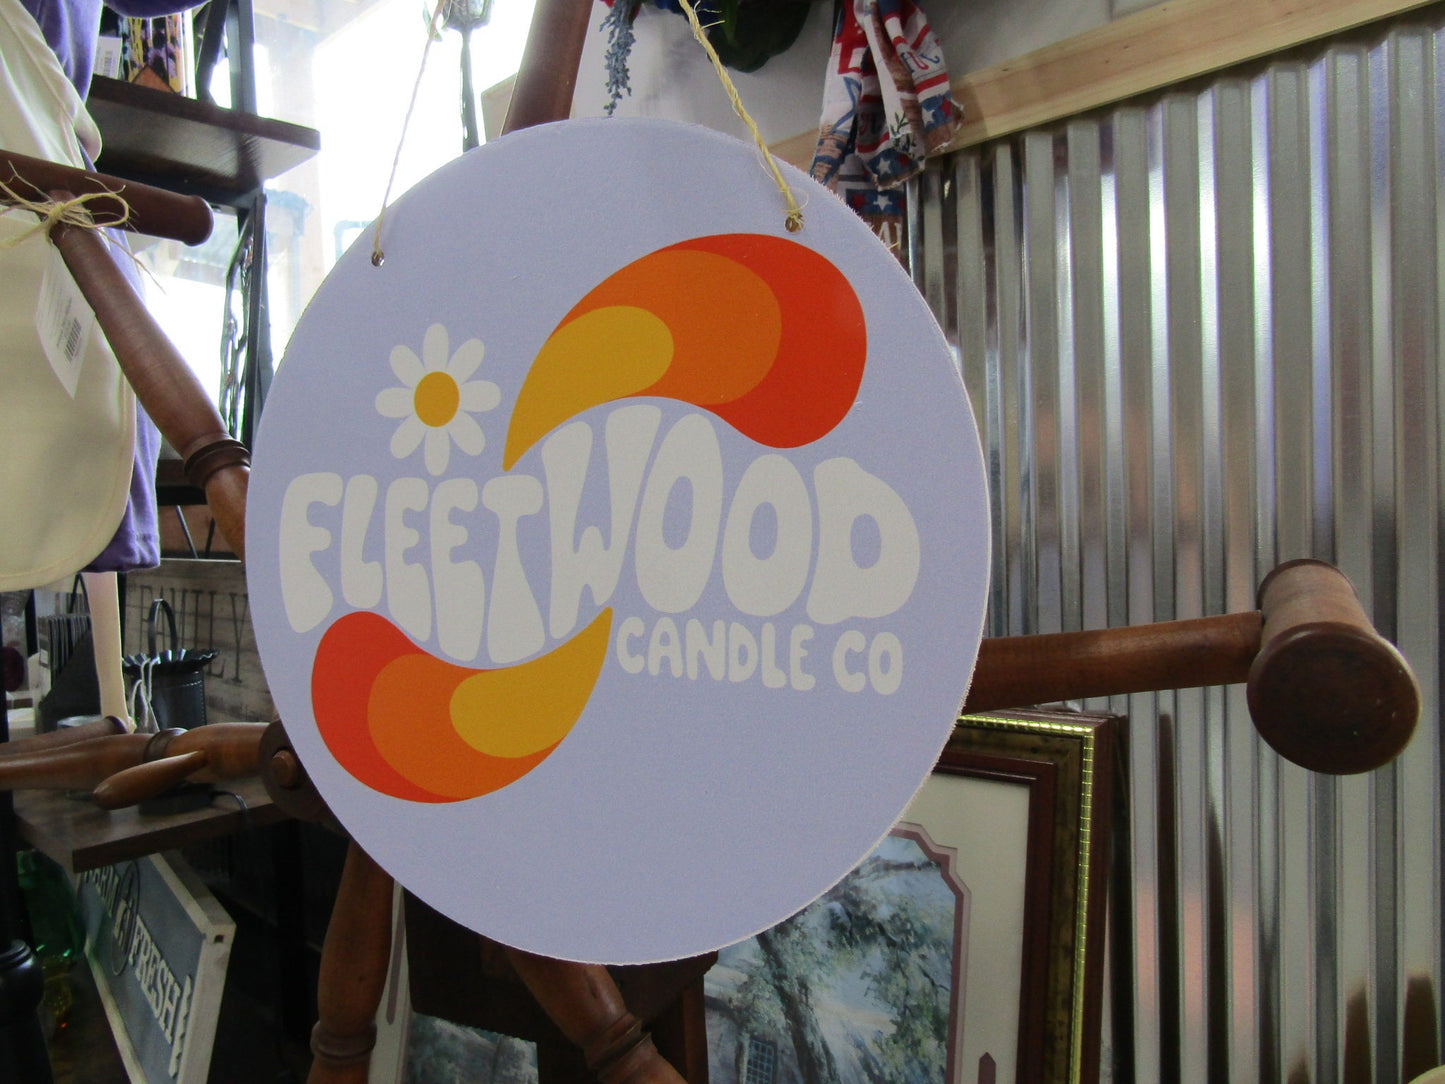 Groovy Fleetwood Candle Co Custom Round Lightweight Business Small Shop Printed On Wood Floral Your Logo Circle Booth Vendor Table Wall Sign